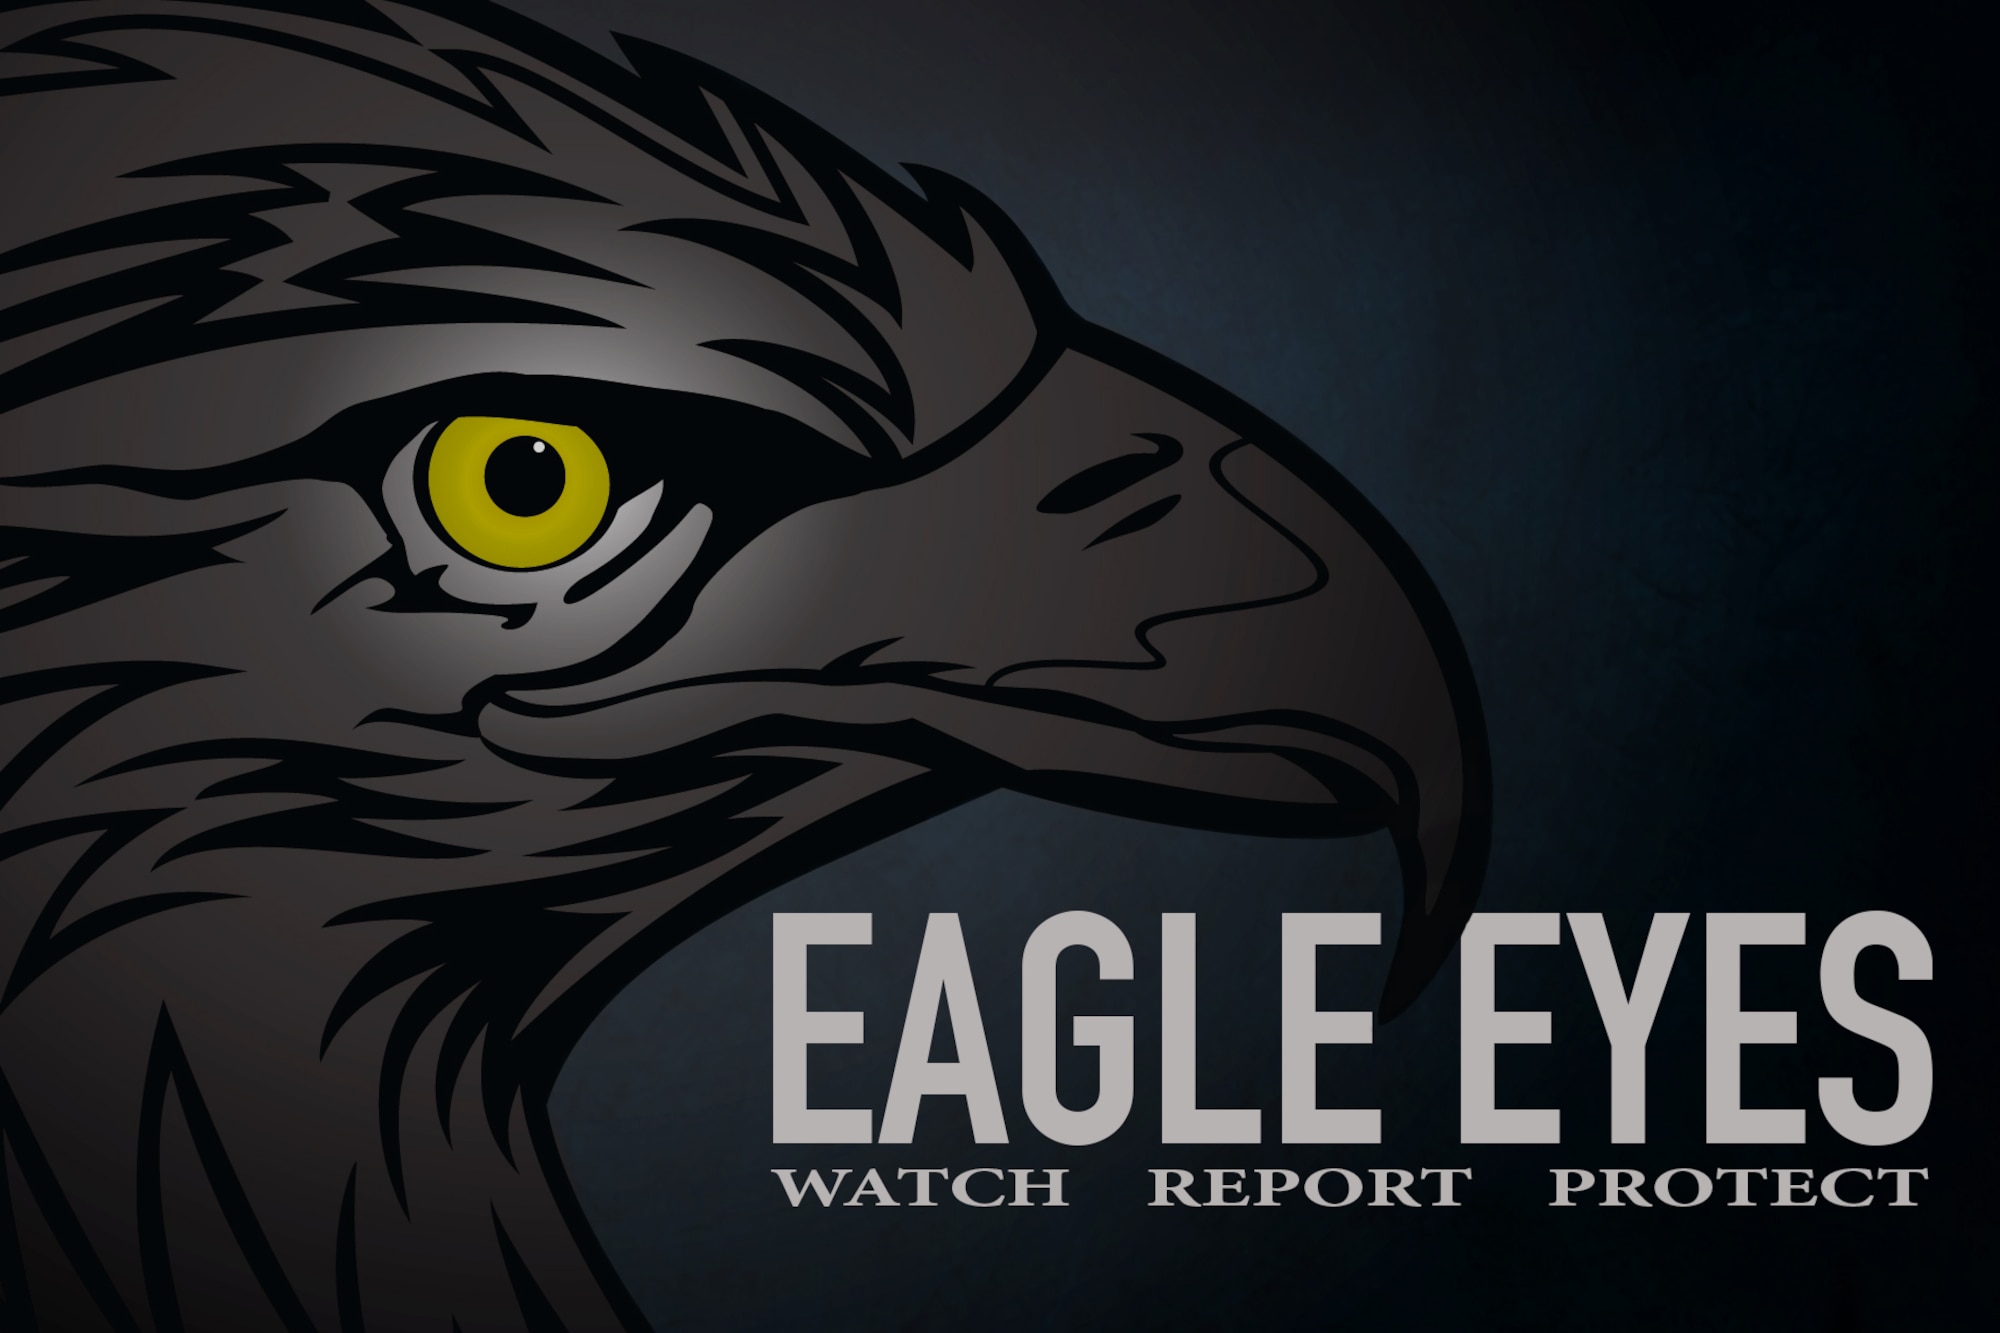 Eagle Eyes: Watch, Report, Protect